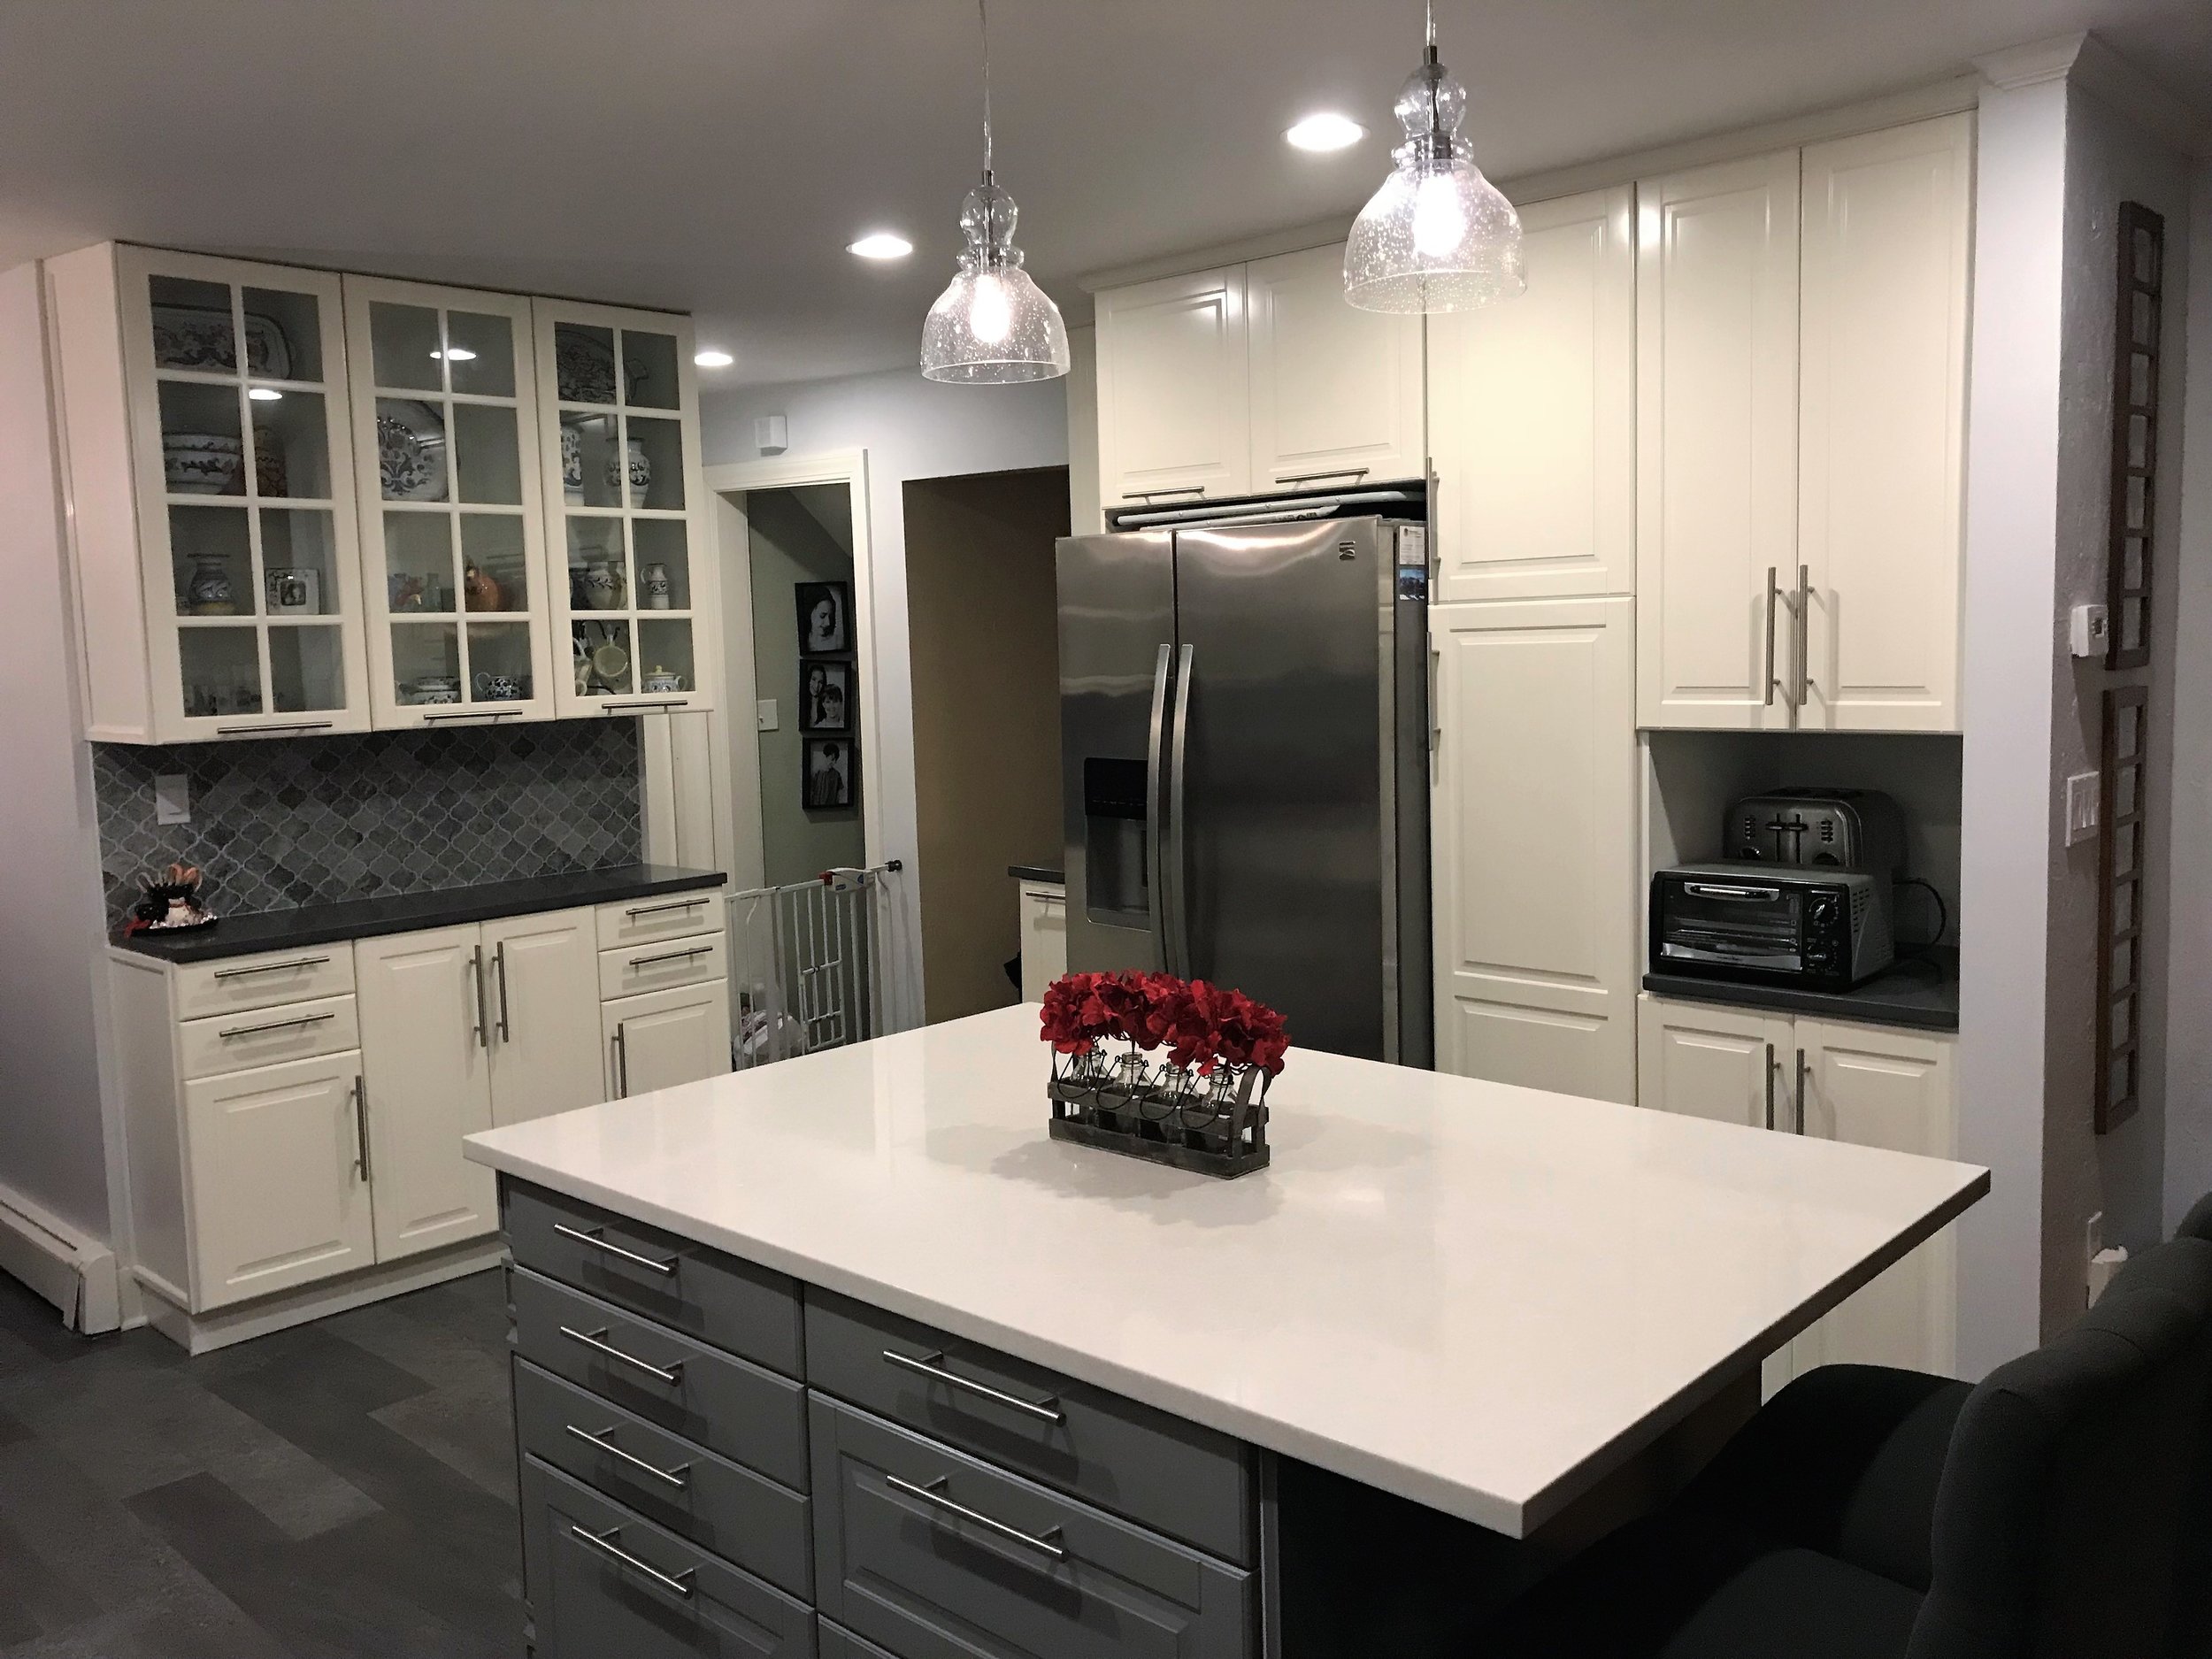 Shaw Remodeling - Kitchen Remodel in Old Lyme CT